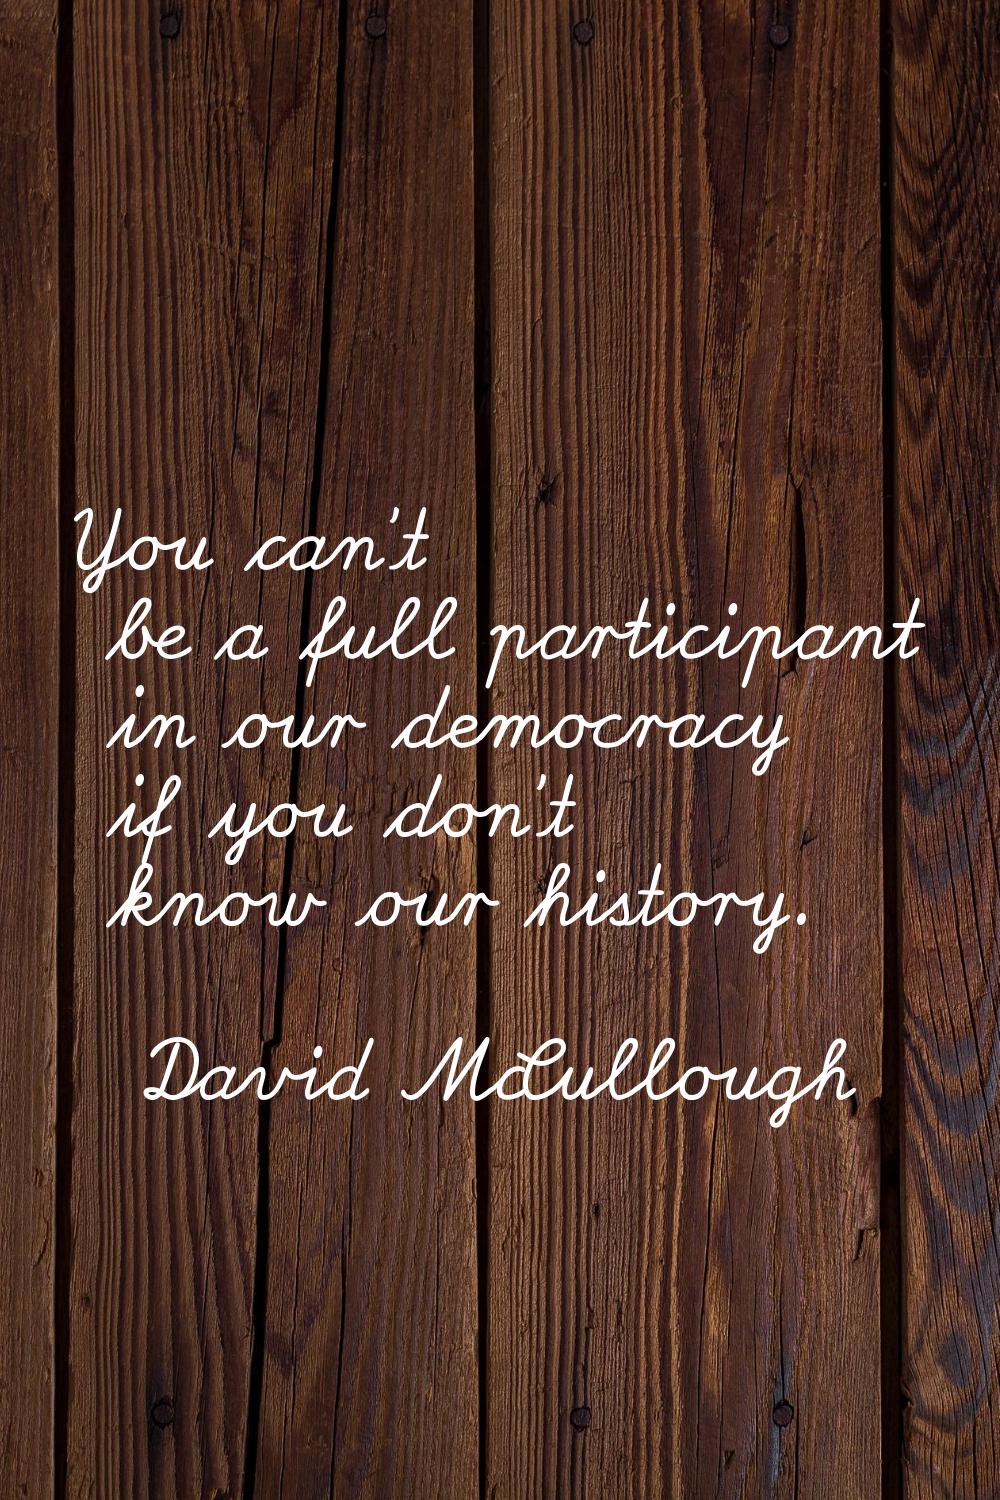 You can't be a full participant in our democracy if you don't know our history.